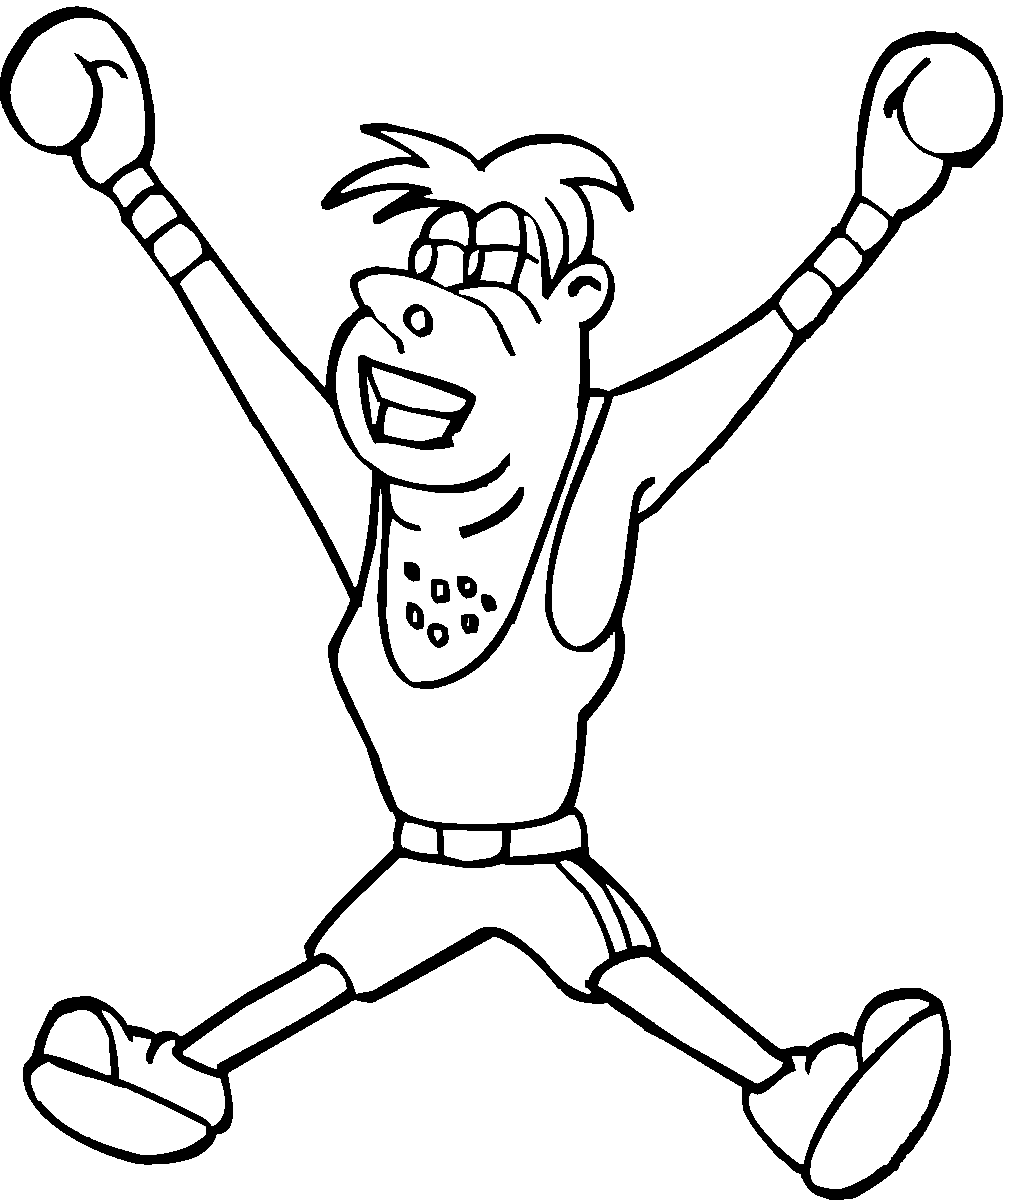 Boxer Winner Coloring Page